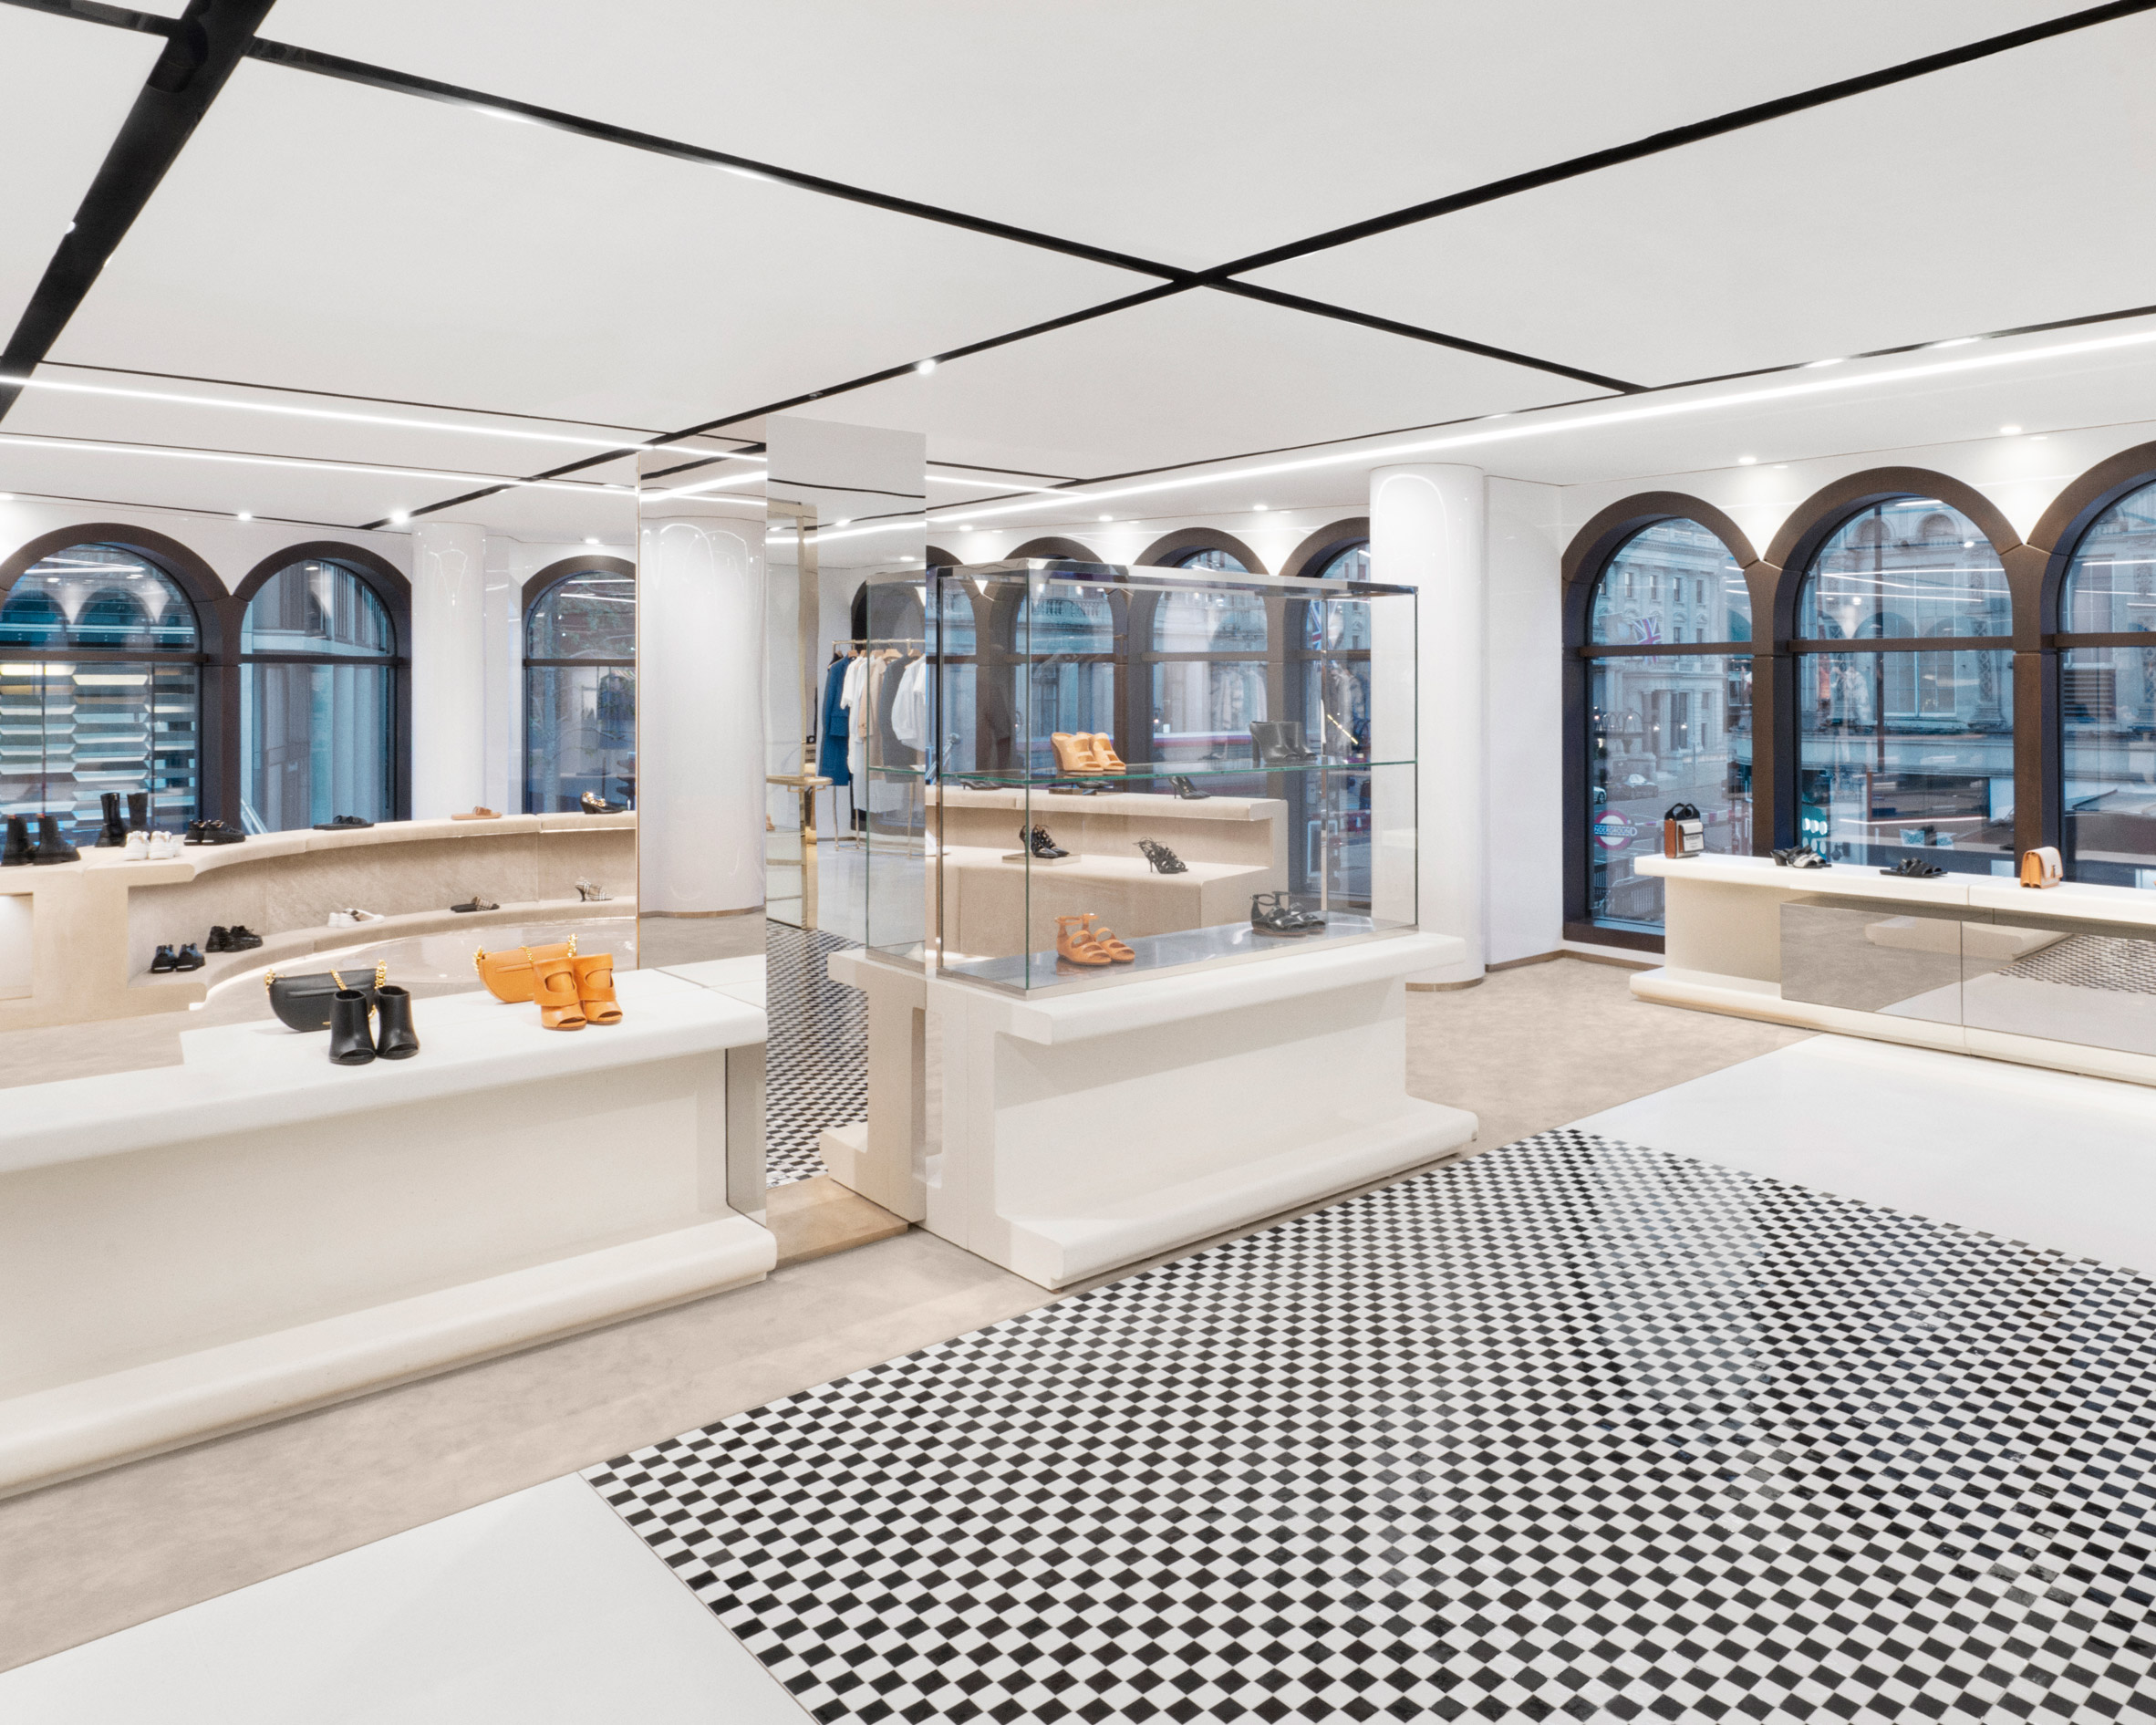 Curved shoe display and checkered floor tiles in No.1 Sloane Street by Vincenzo De Cotiis